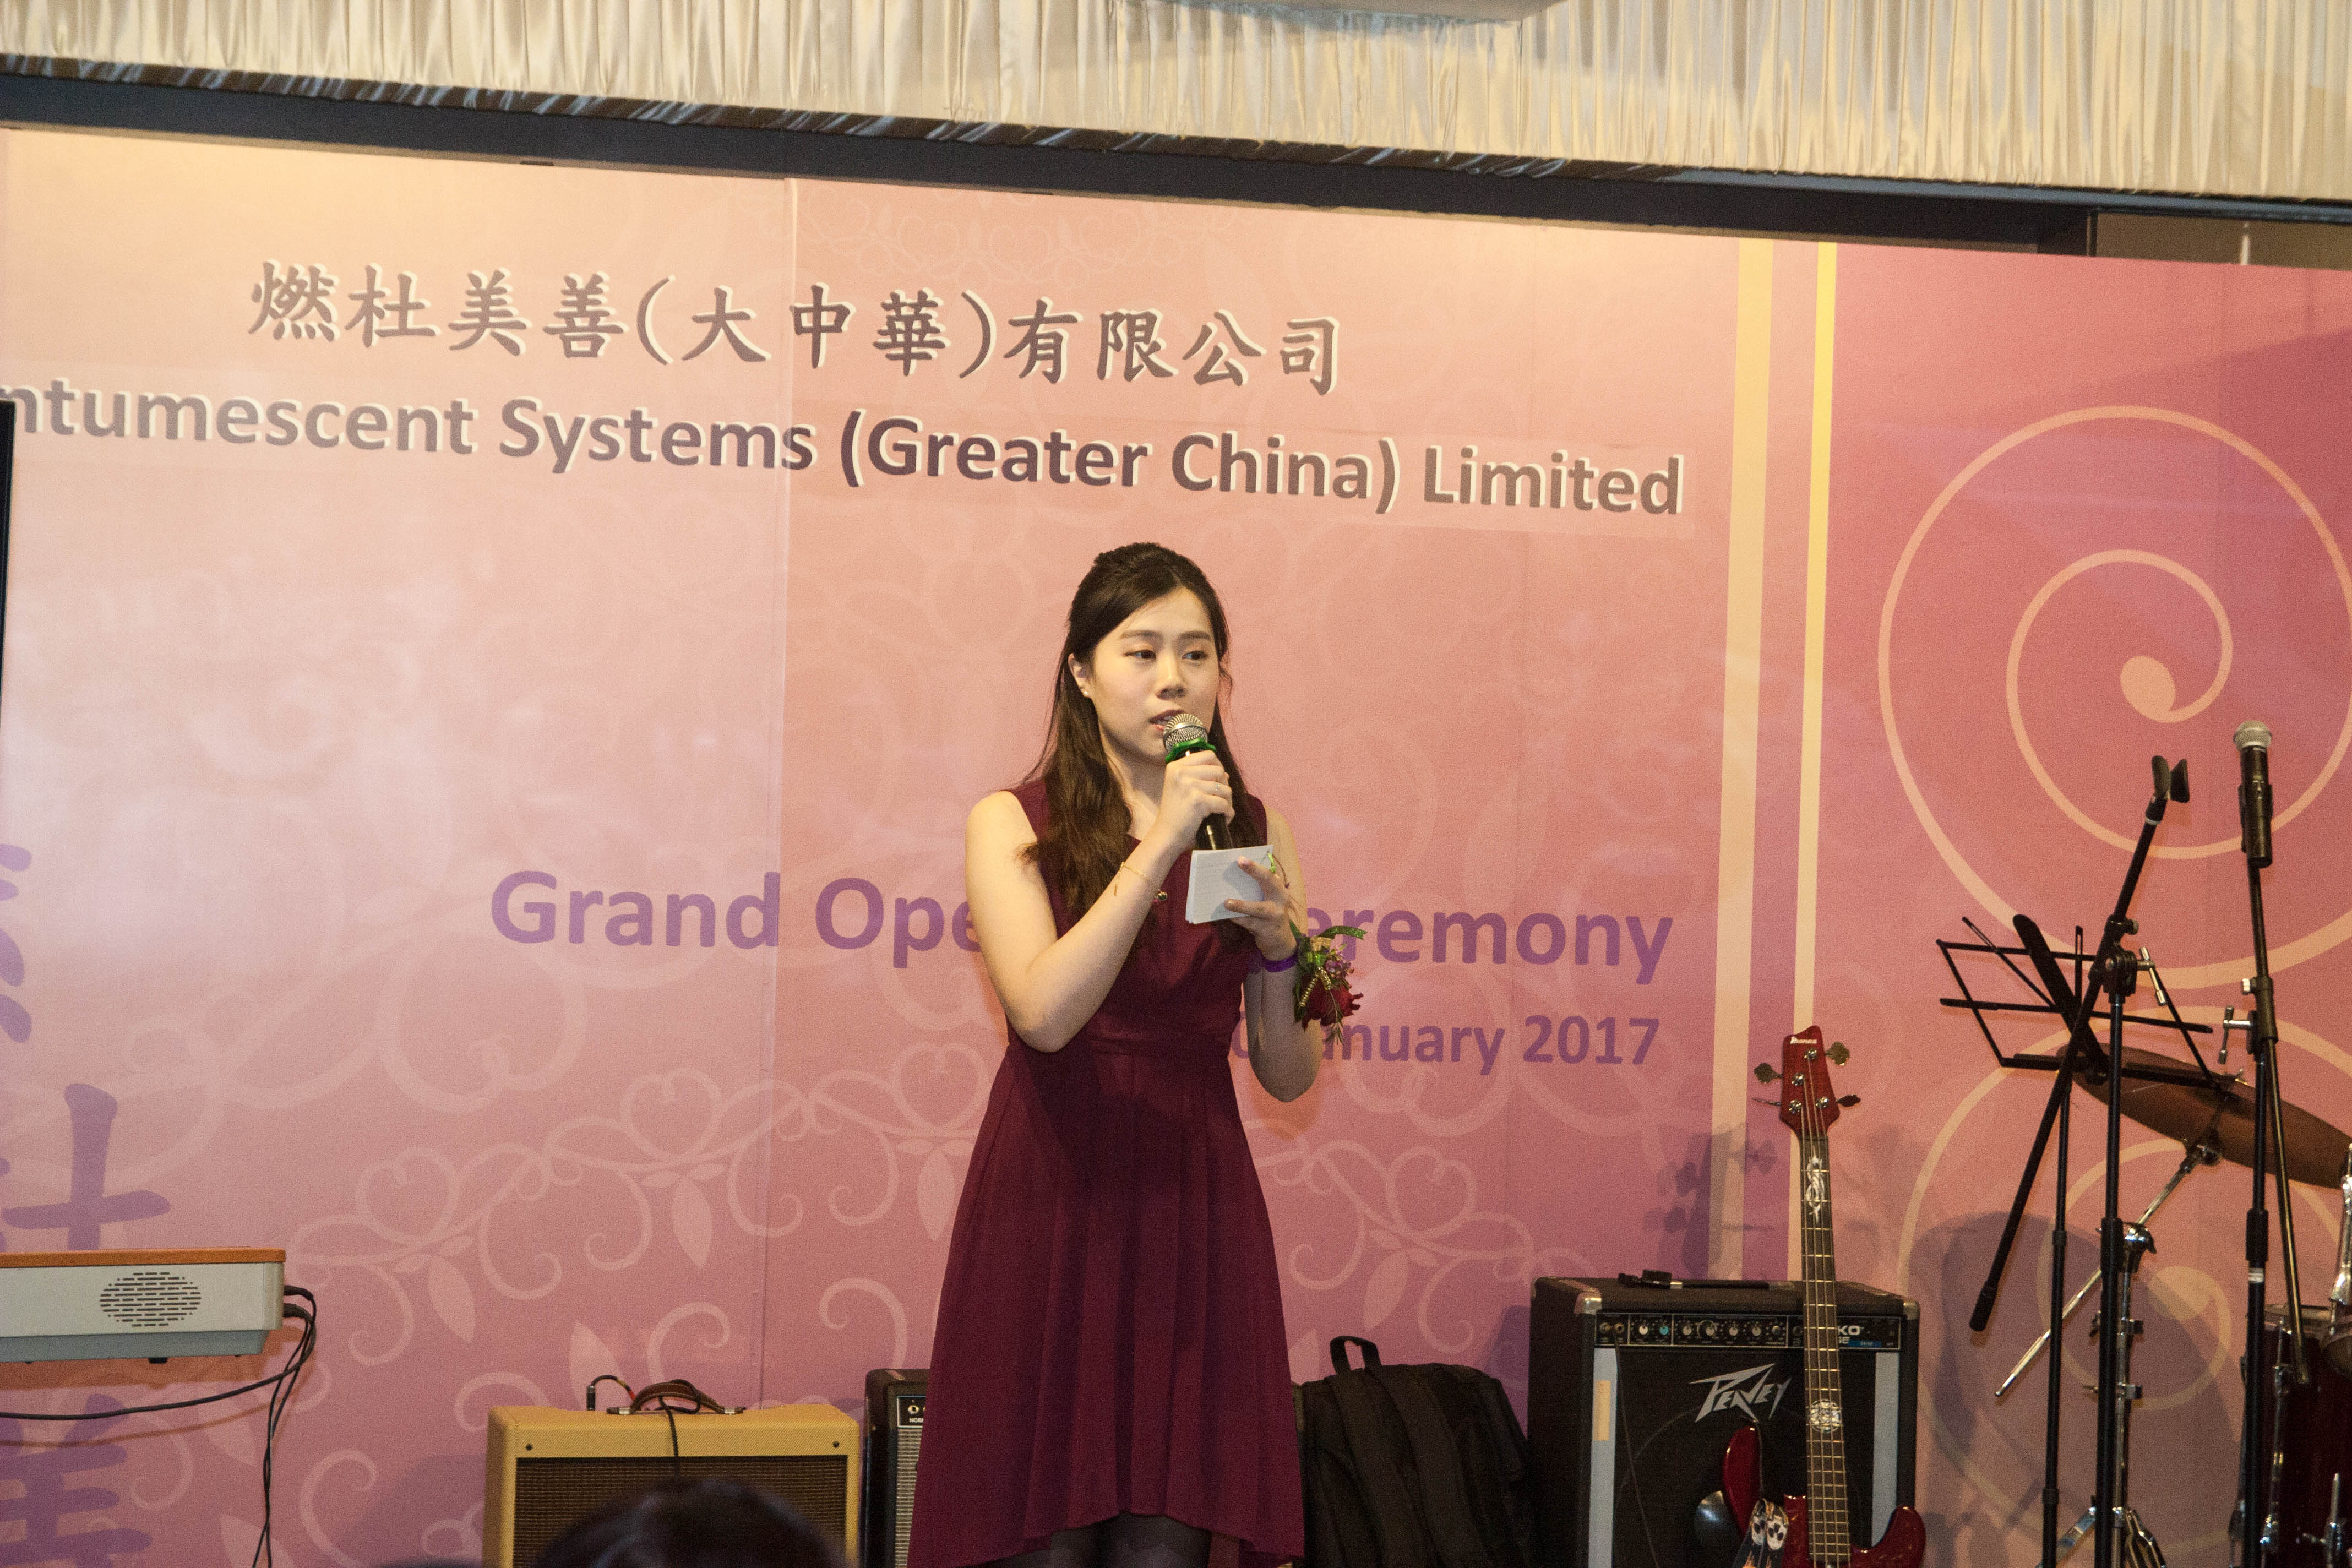 Angela Wu之司儀主持紀錄: Grand Opening Ceremony of Intumescent Systems (Greater China) Ltd